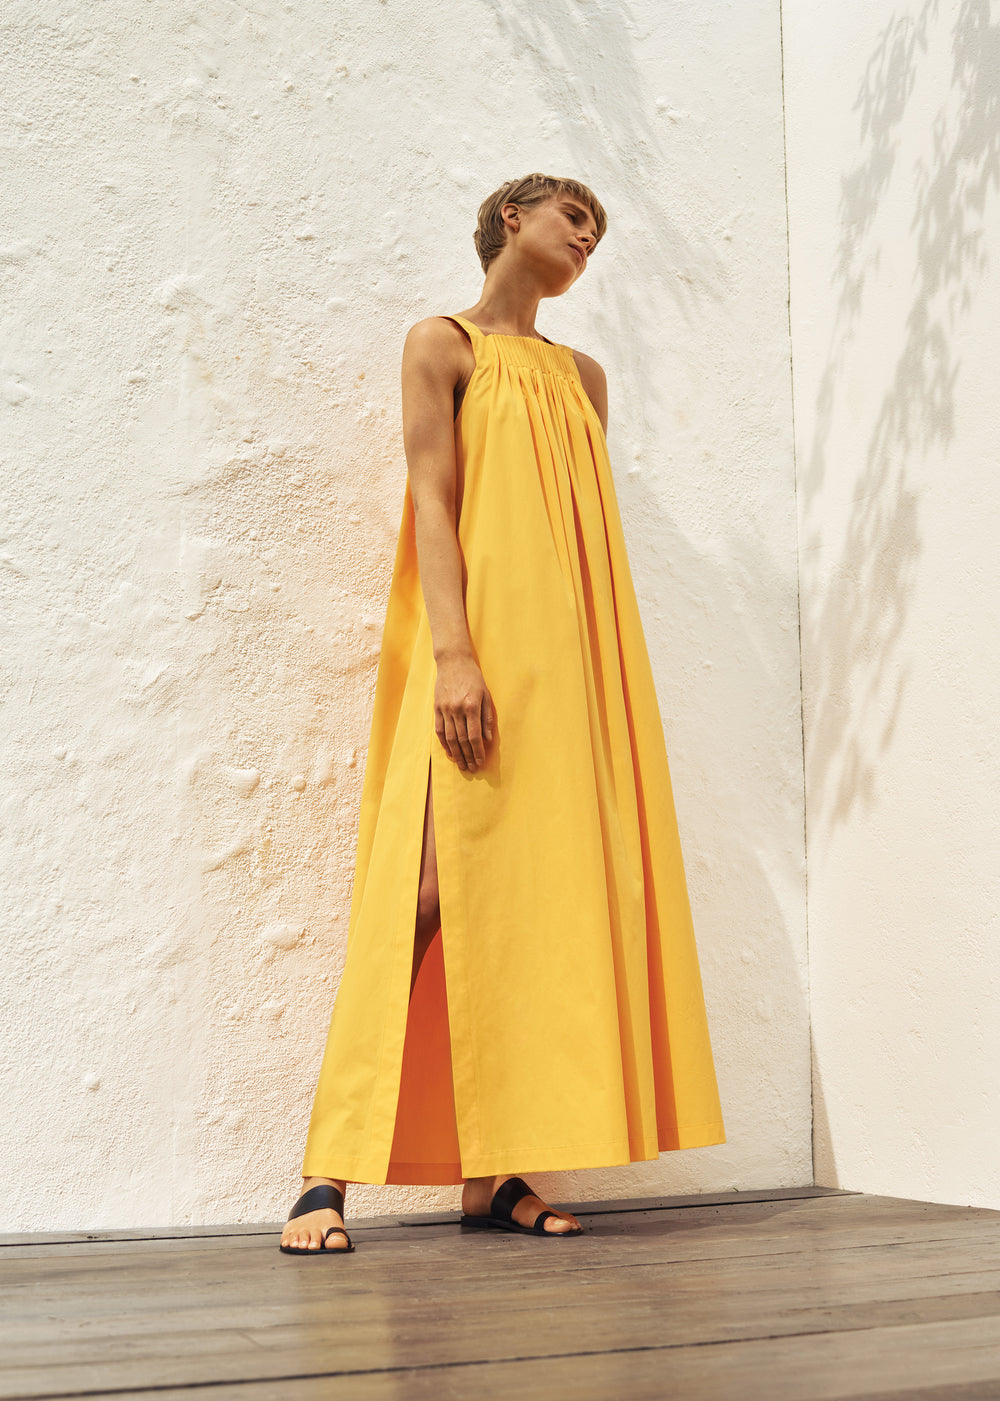 Discover the Resort 20 – Three Graces London